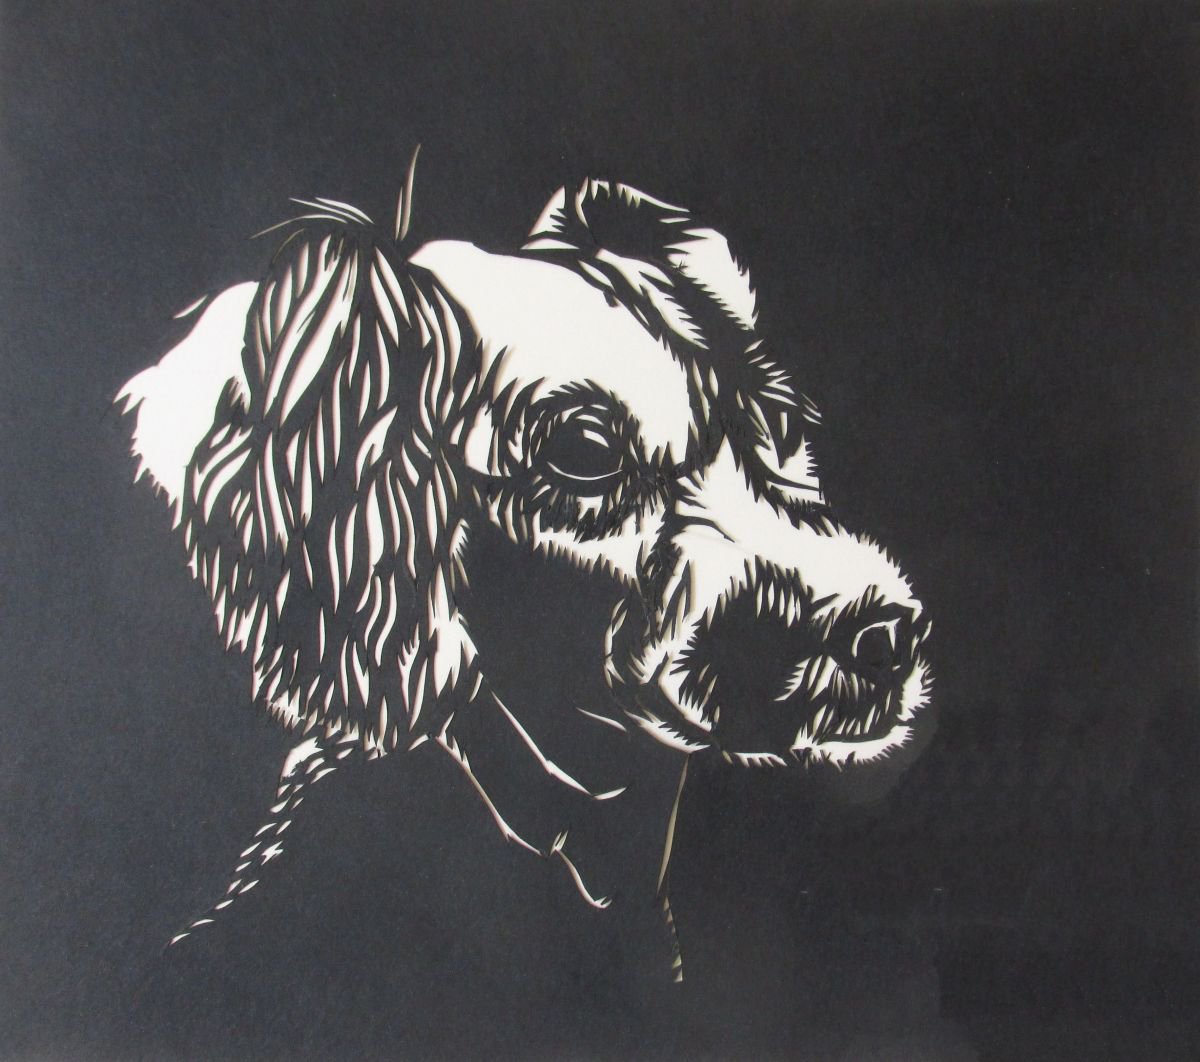 Cocker spaniel portrait paper cut by Alfred Ng